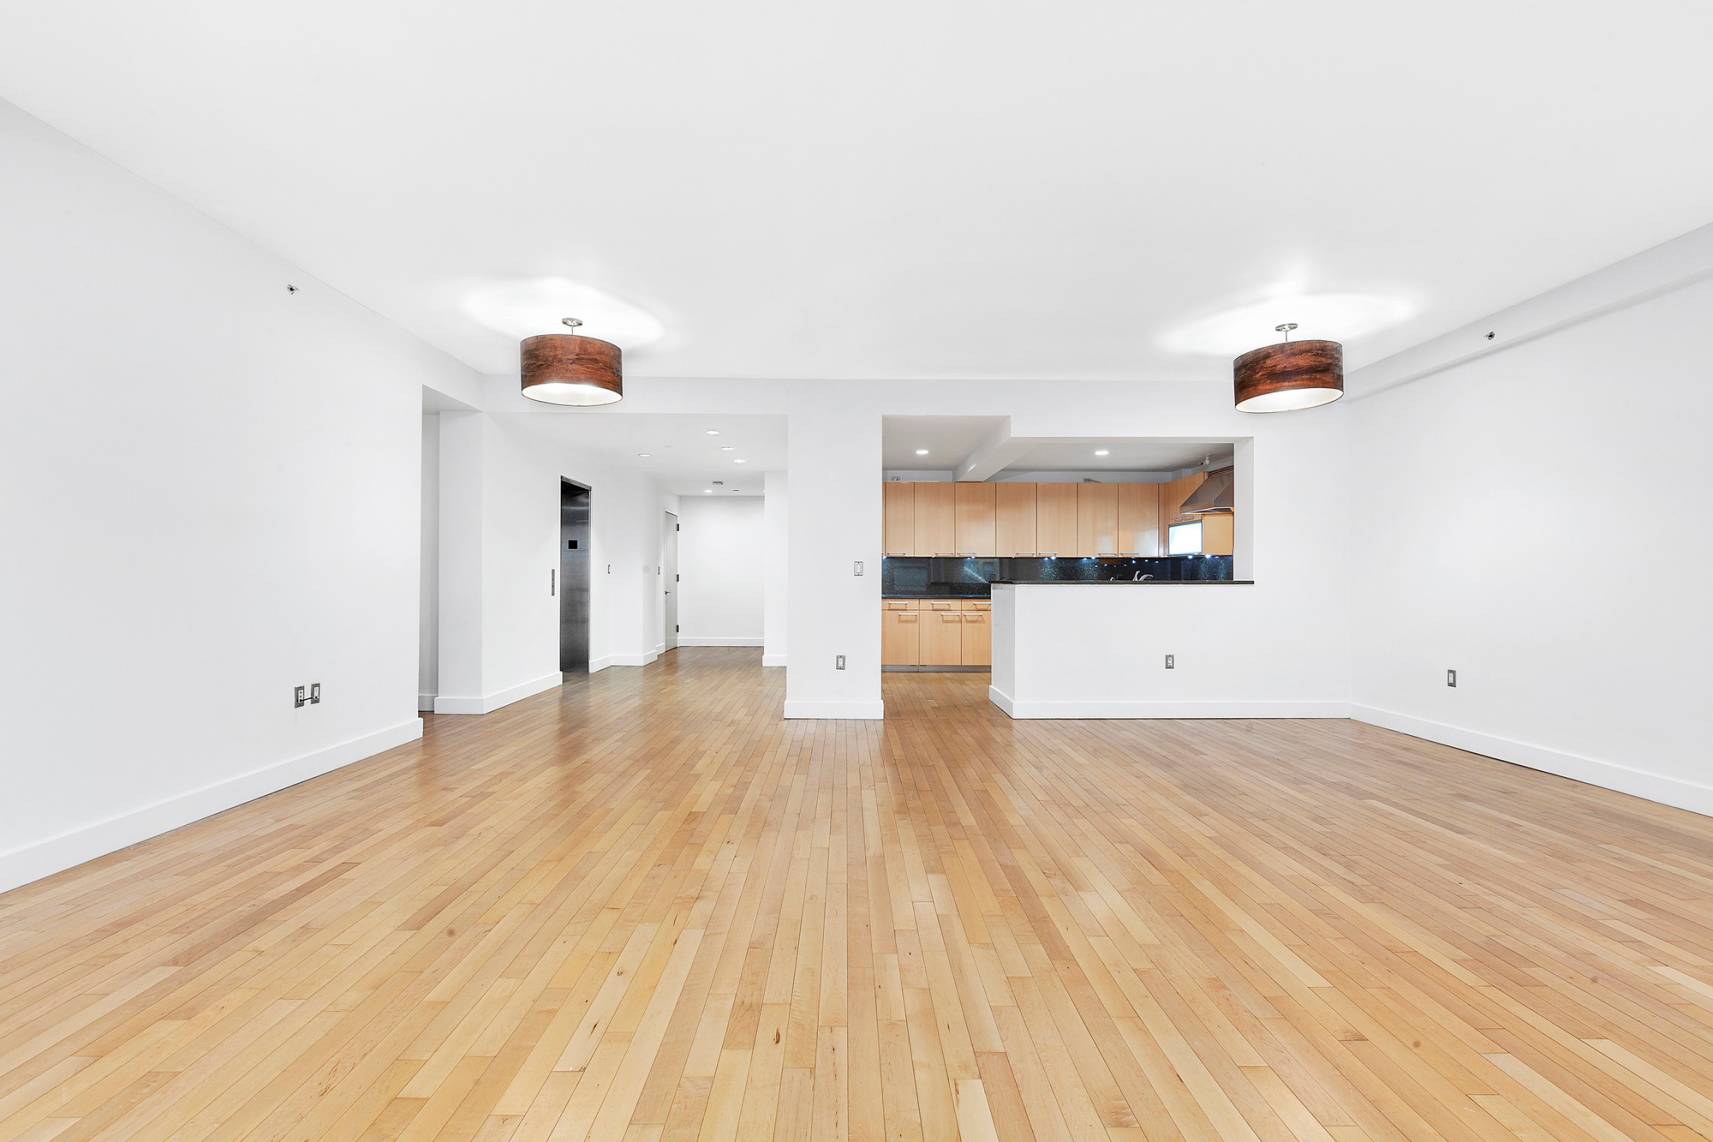 This private, full floor luxury loft at The Paradigm, an intimate boutique condominium in prime Chelsea, spans over 2, 500sf and comprises 3 bedrooms, 3 full baths, and 2 south ...